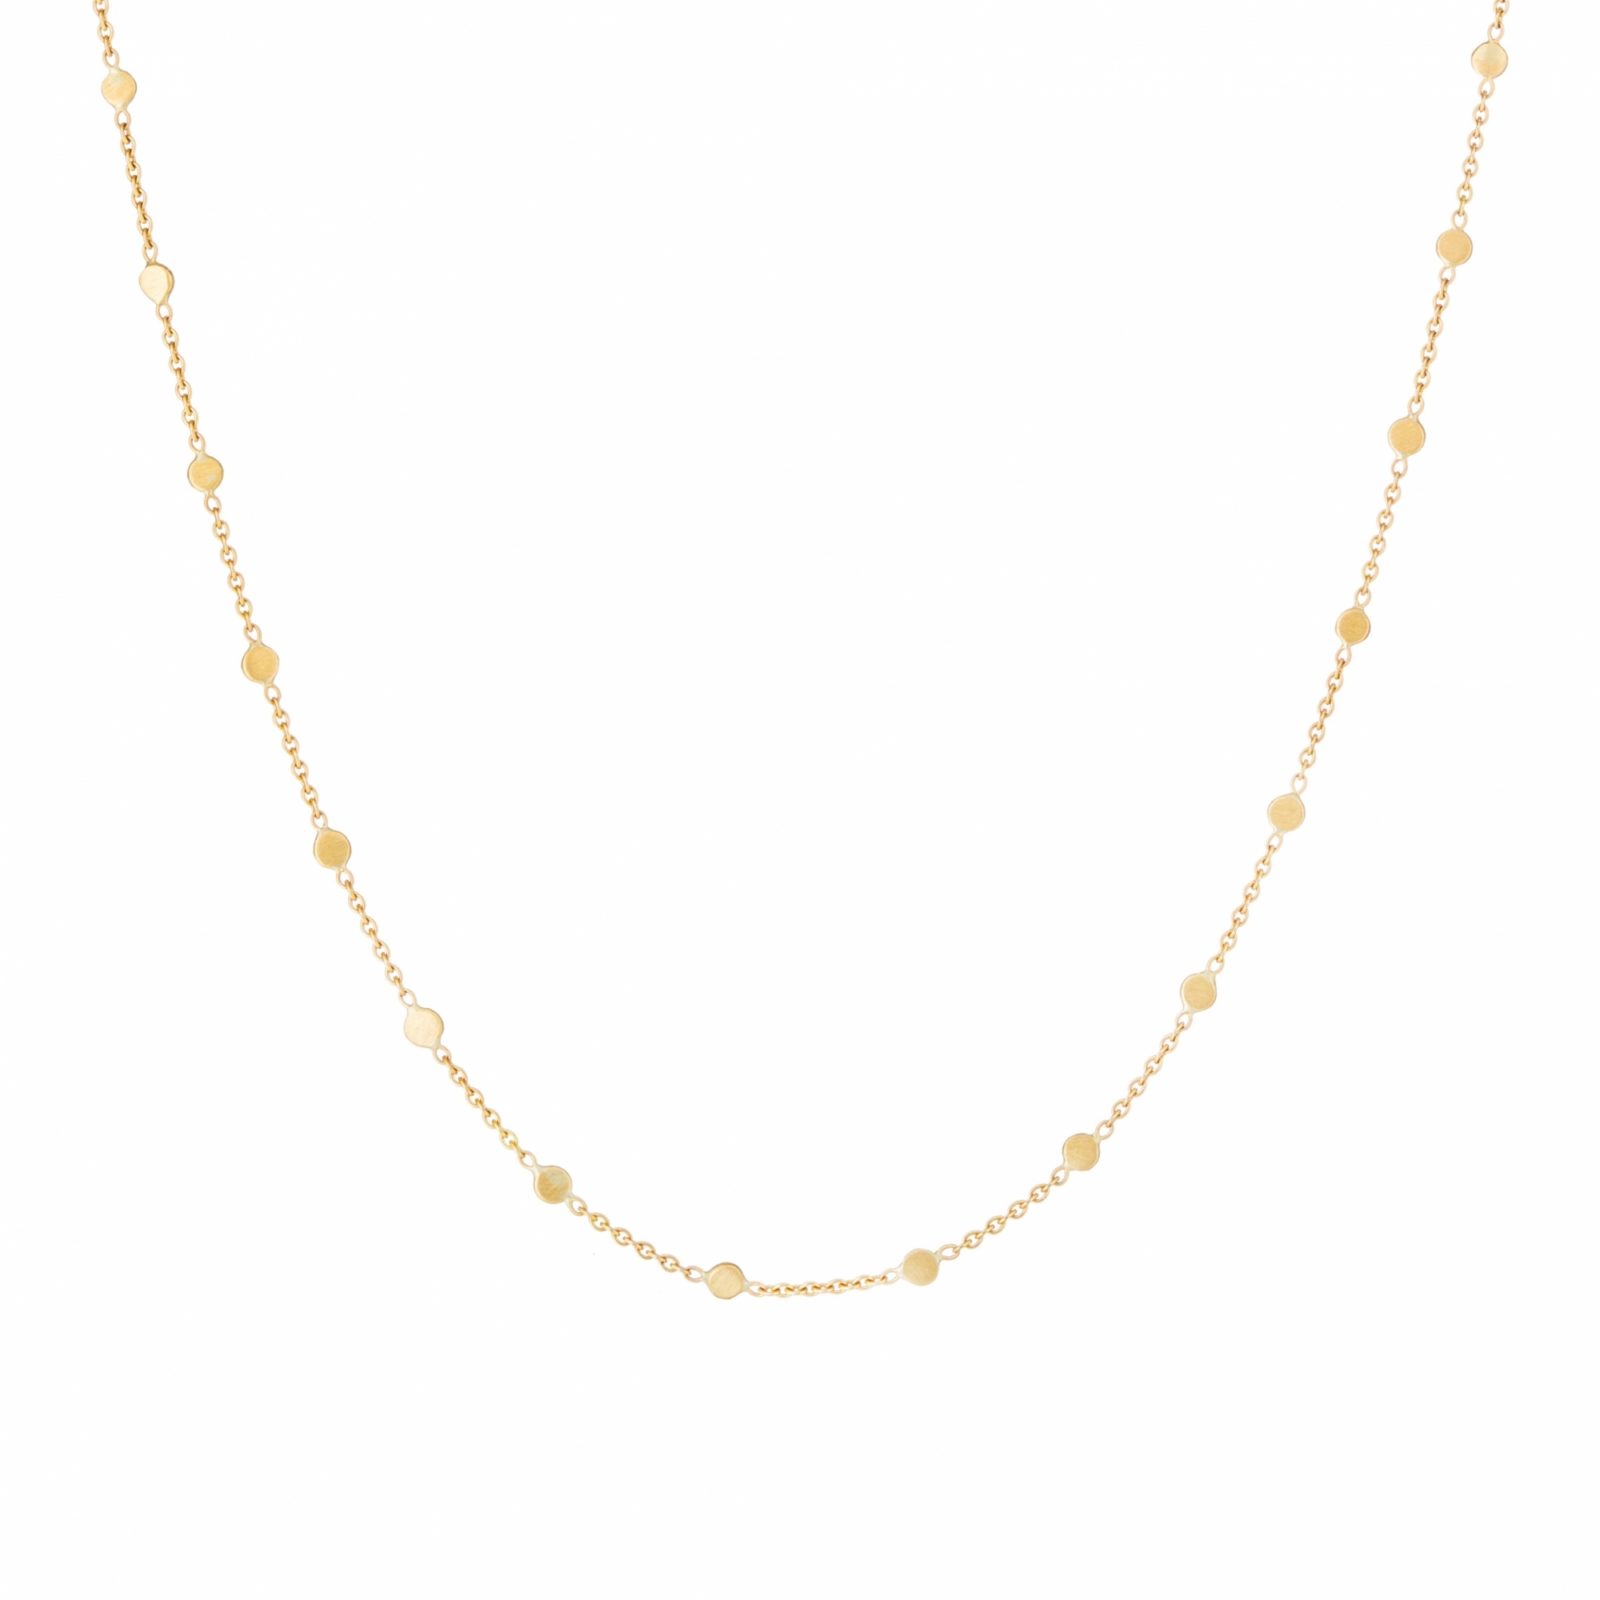 Sia Taylor SN3 Y Yellow Gold Dust Necklace WB